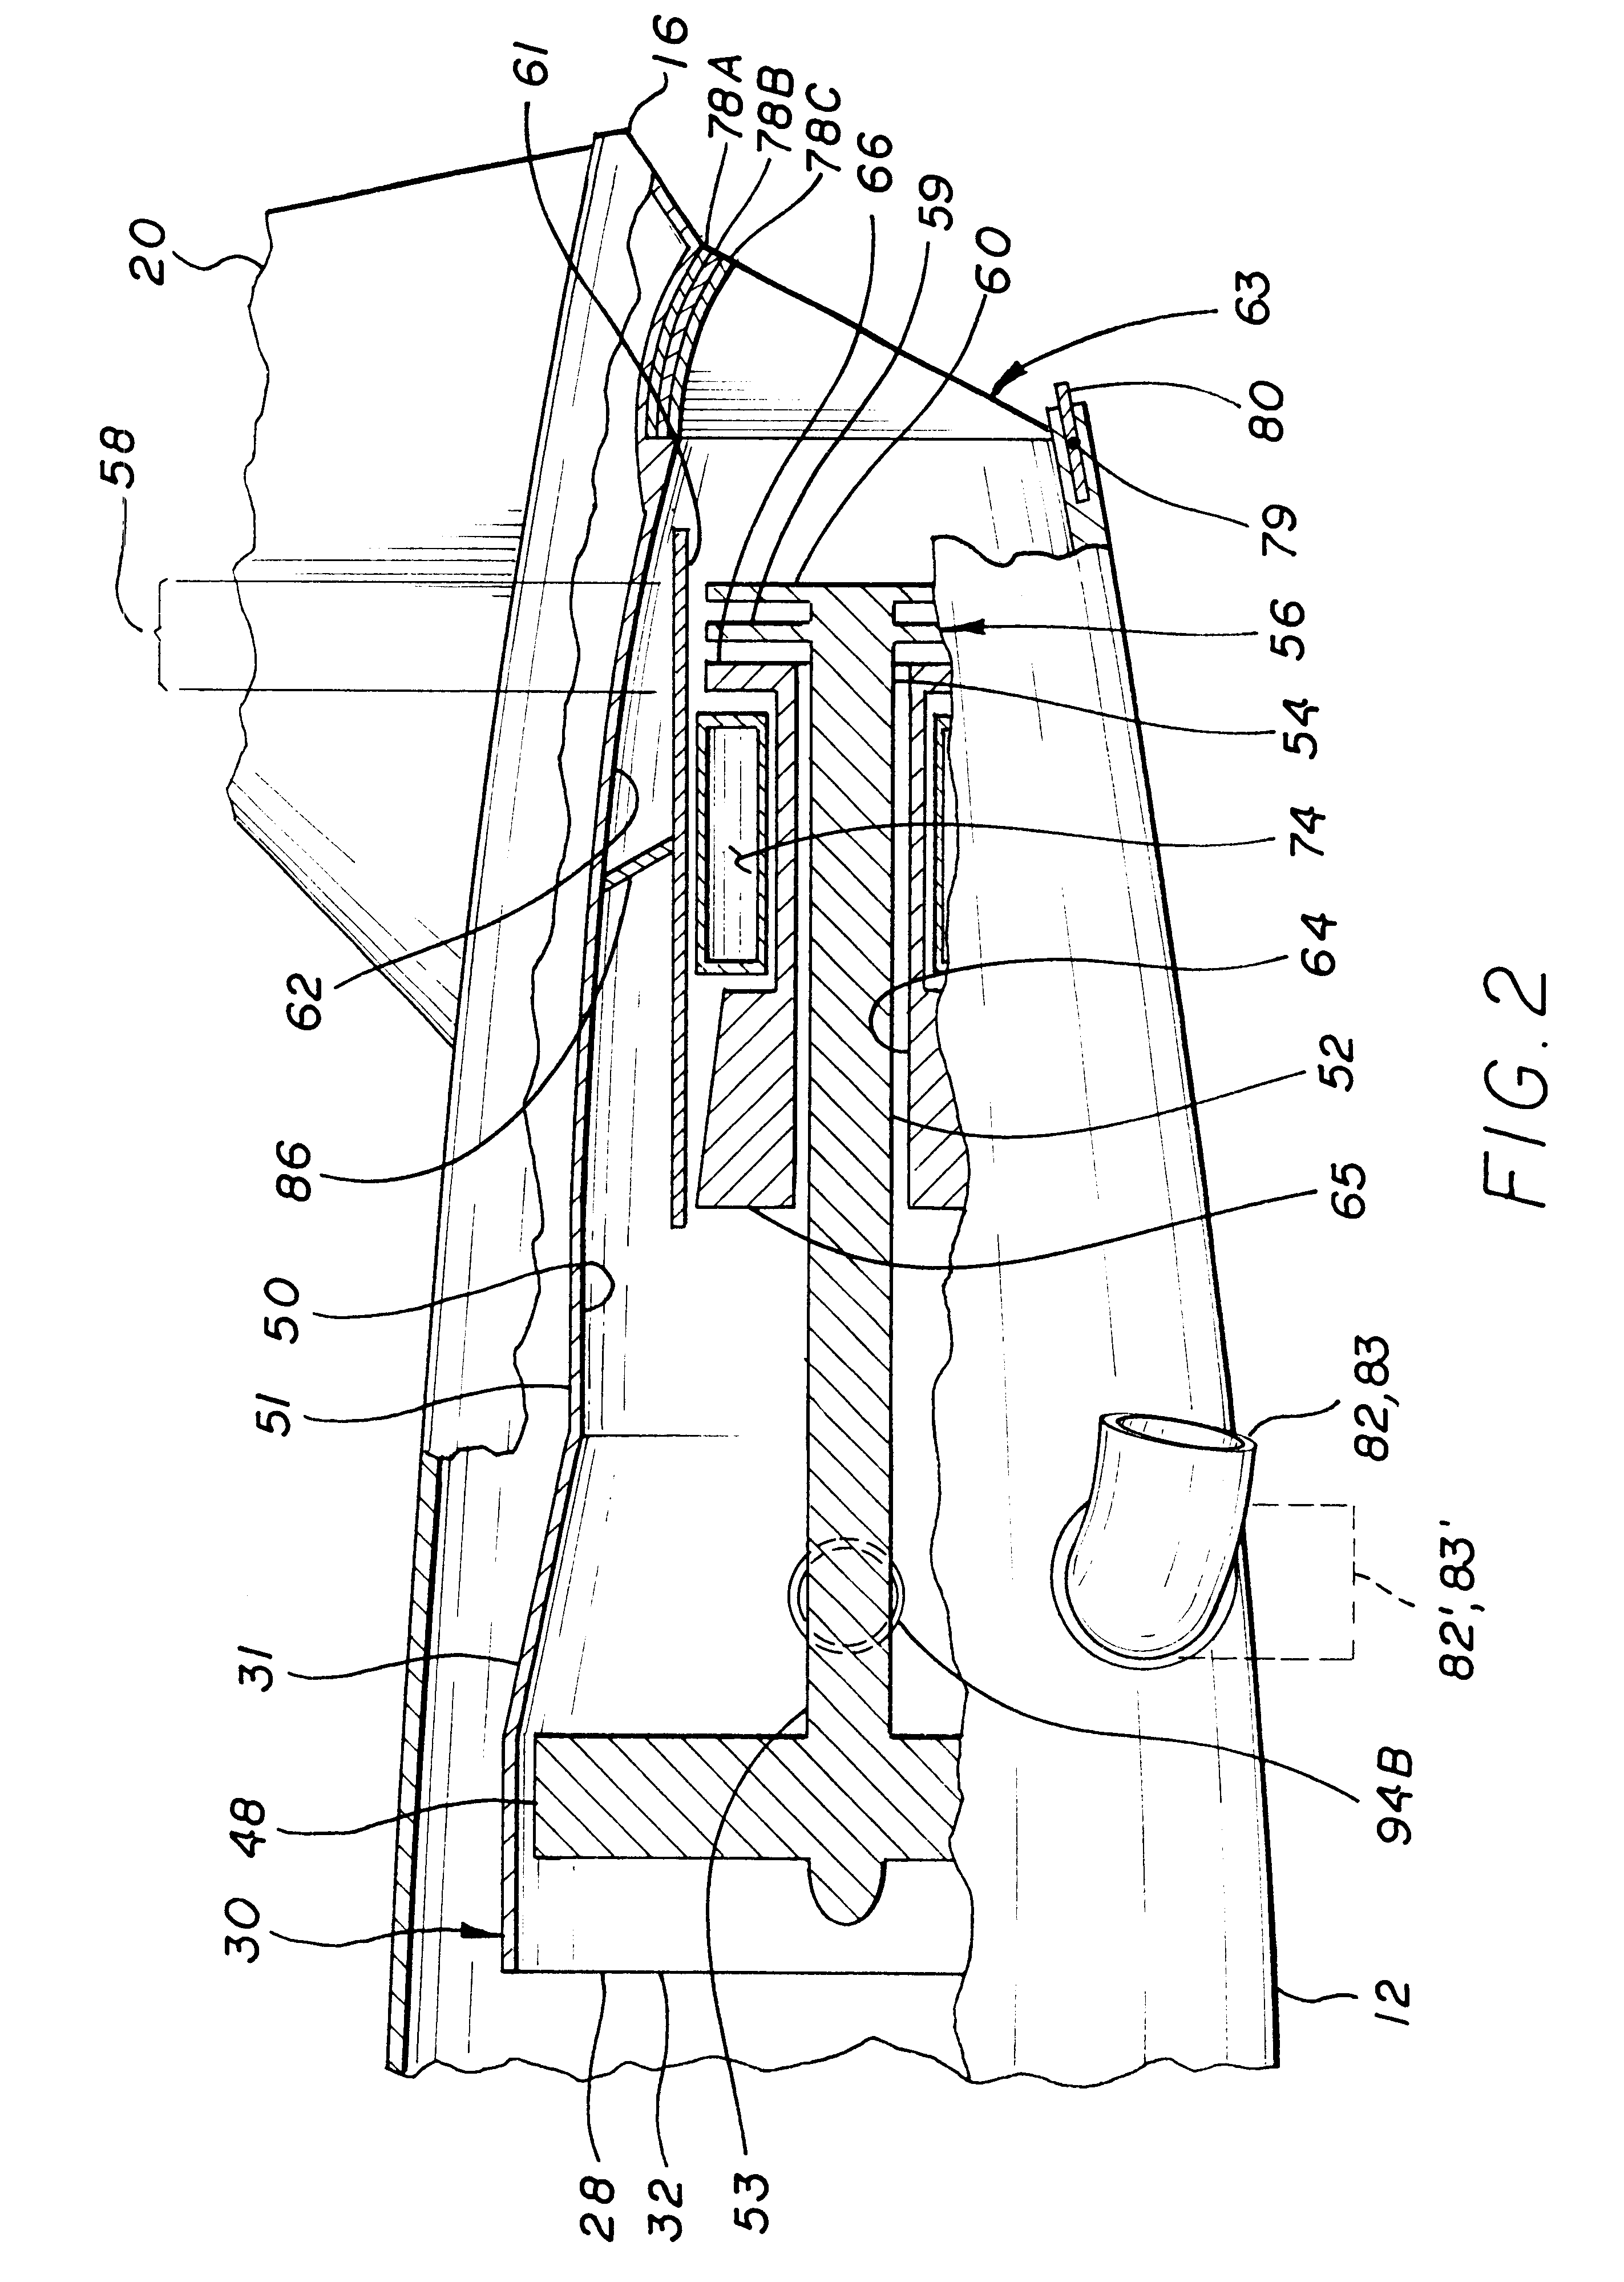 Propulsion system for a vertical and short takeoff and landing aircraft